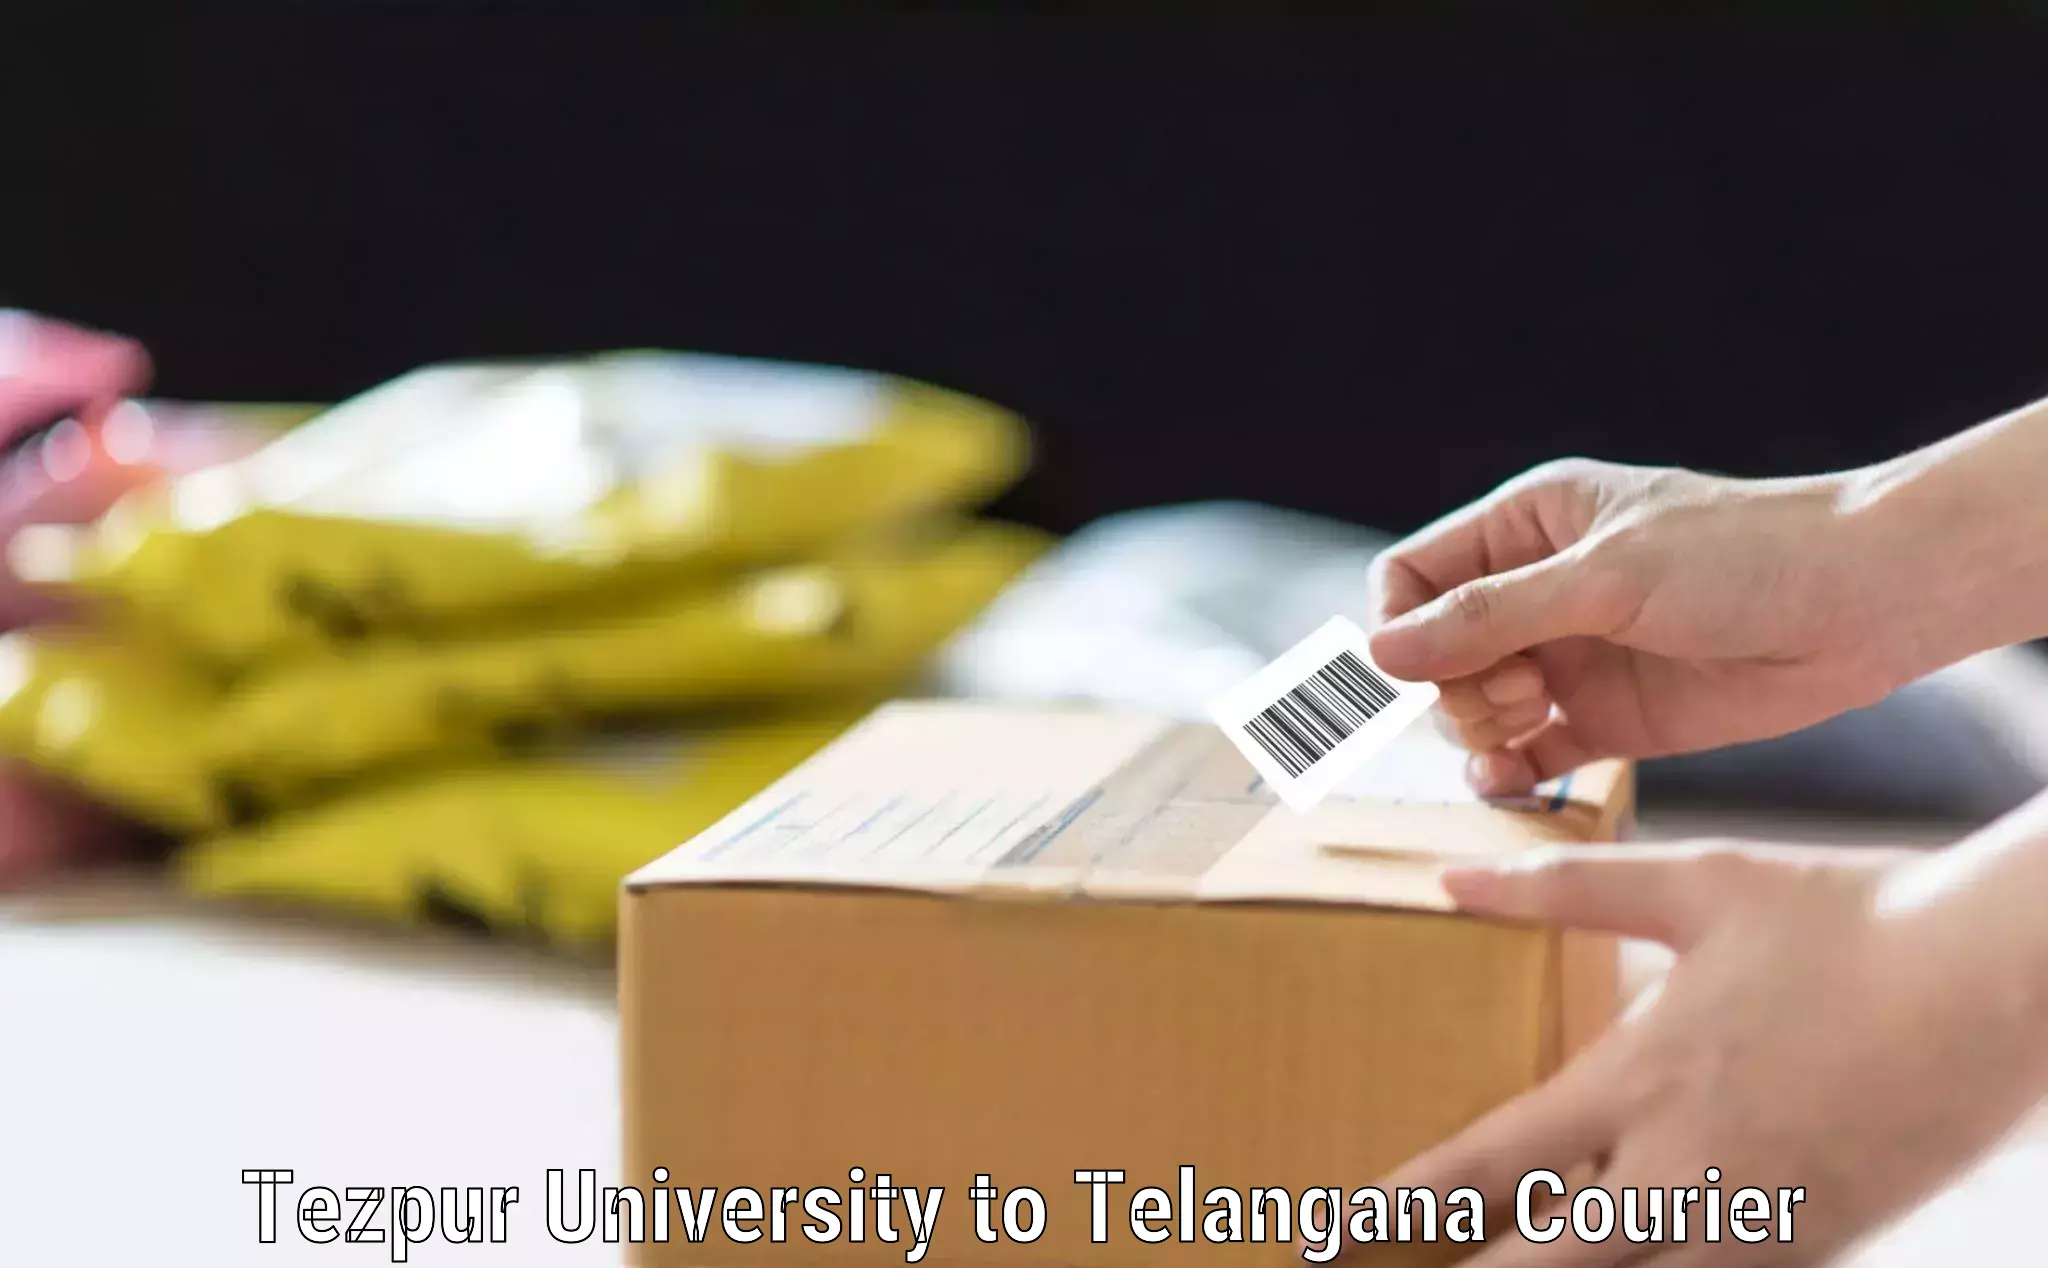 Airport luggage delivery in Tezpur University to Wanaparthy